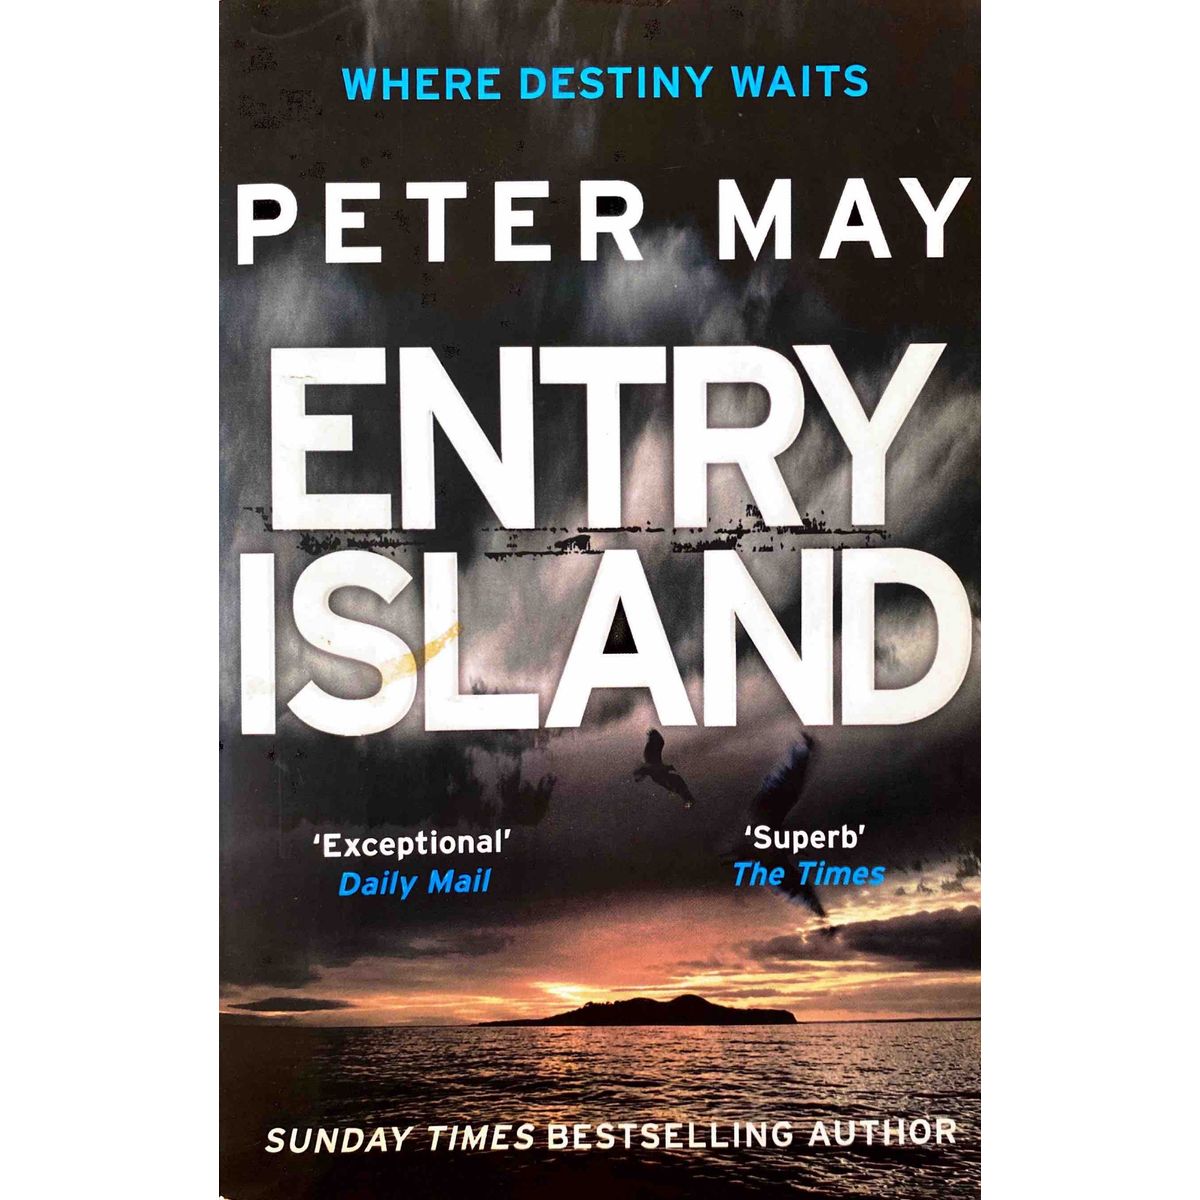 ISBN: 9781782062233 / 1782062238 - Entry Island by Peter May [2014]